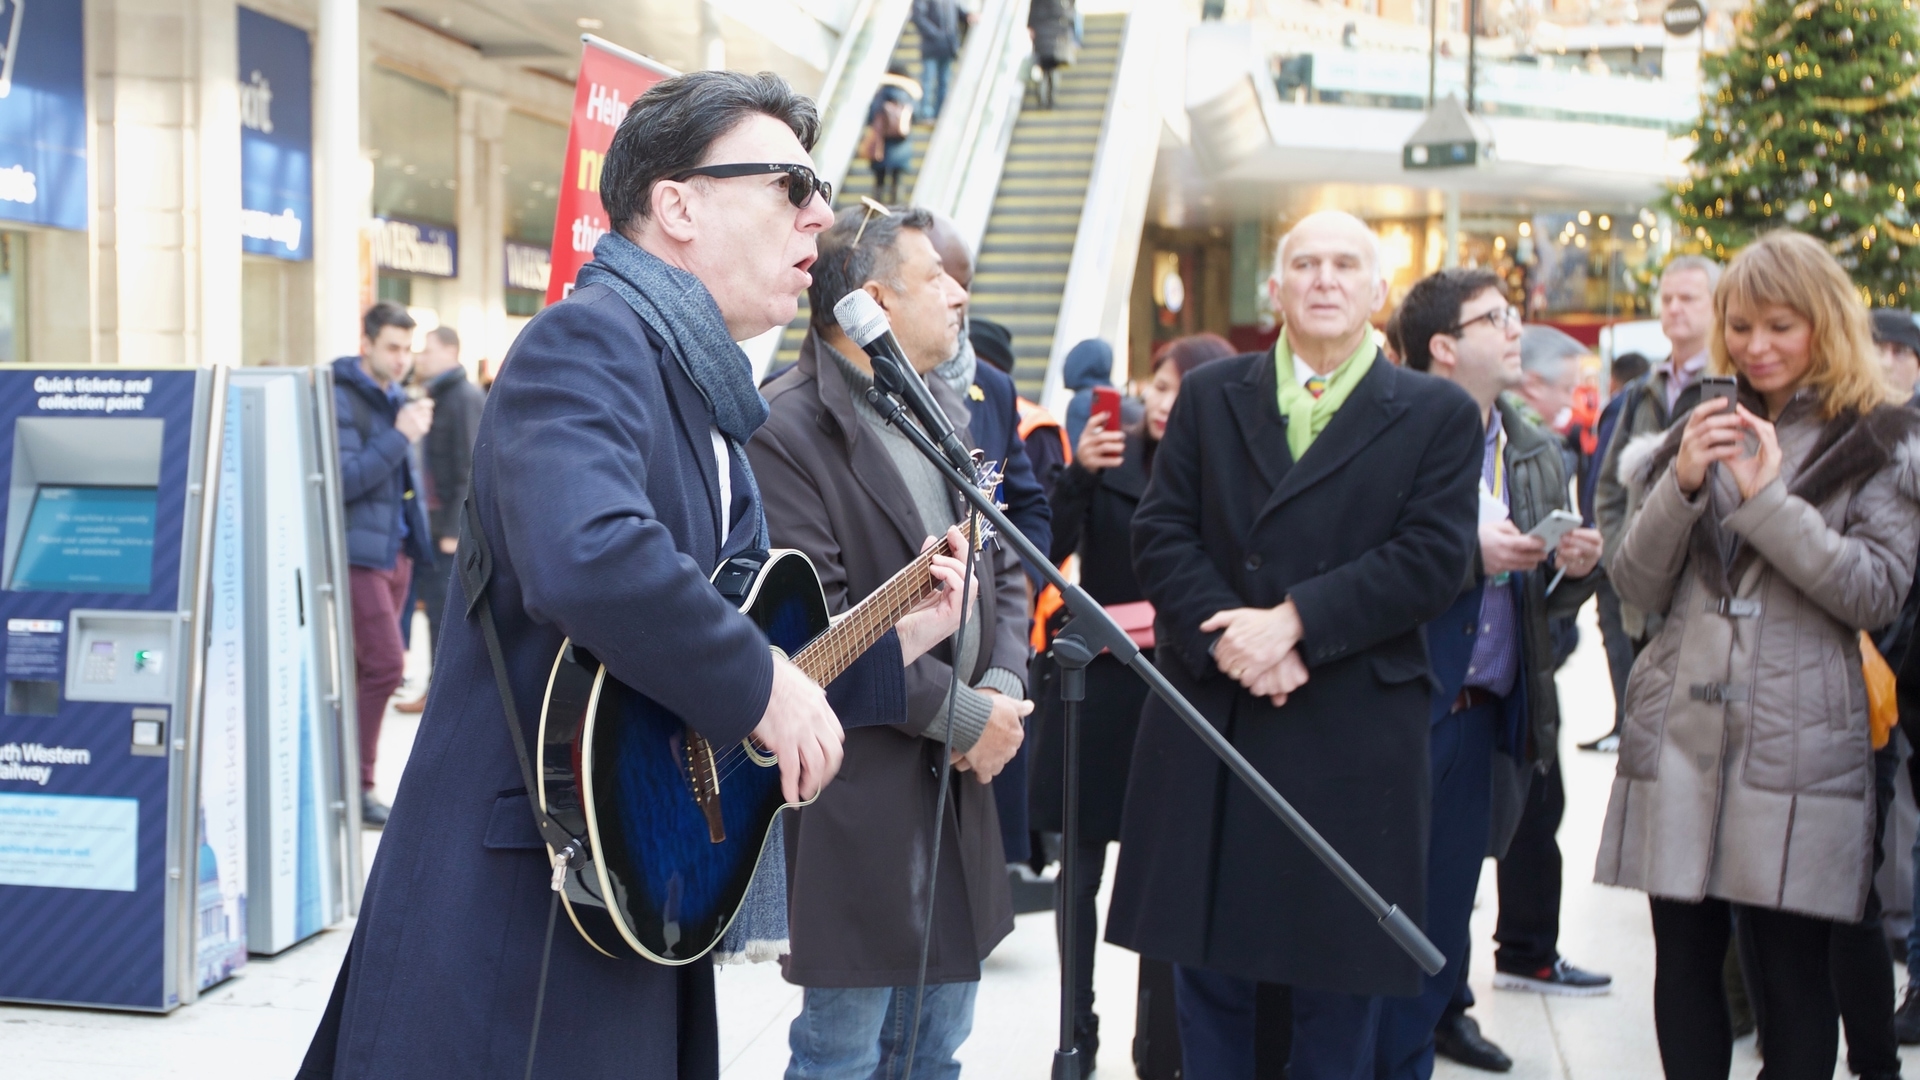 Phil Ryan sings at Waterloo Station - with Vince Cable watching